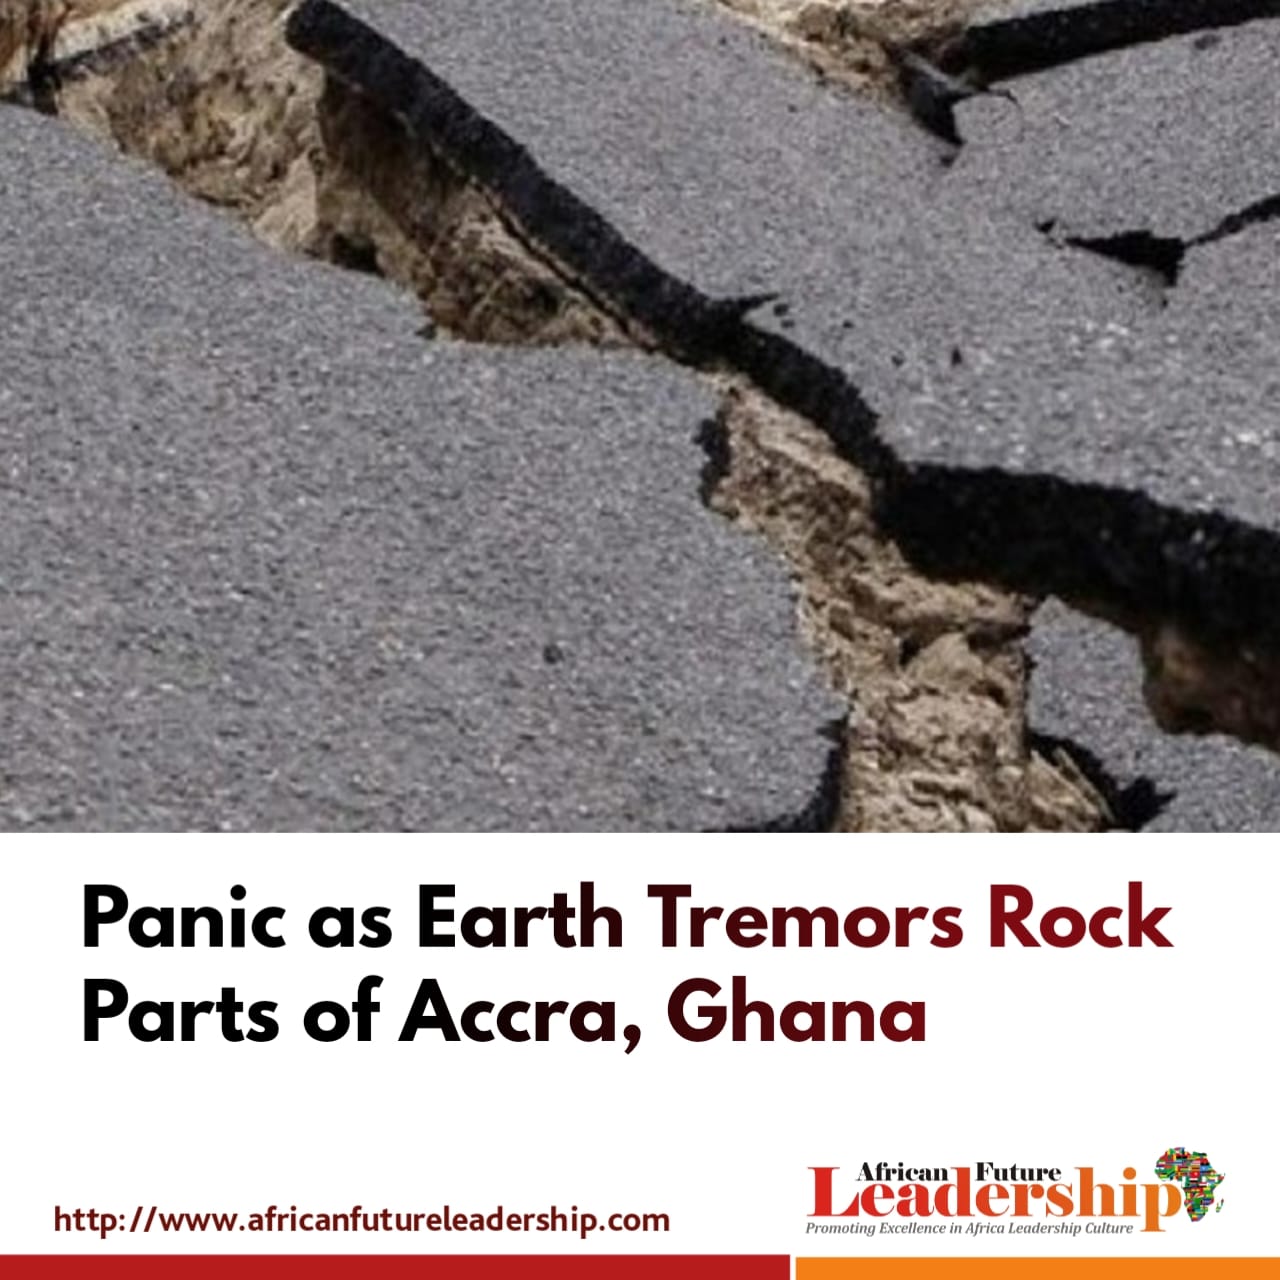 Panic as Earth Tremors Rock Parts of Accra, Ghana